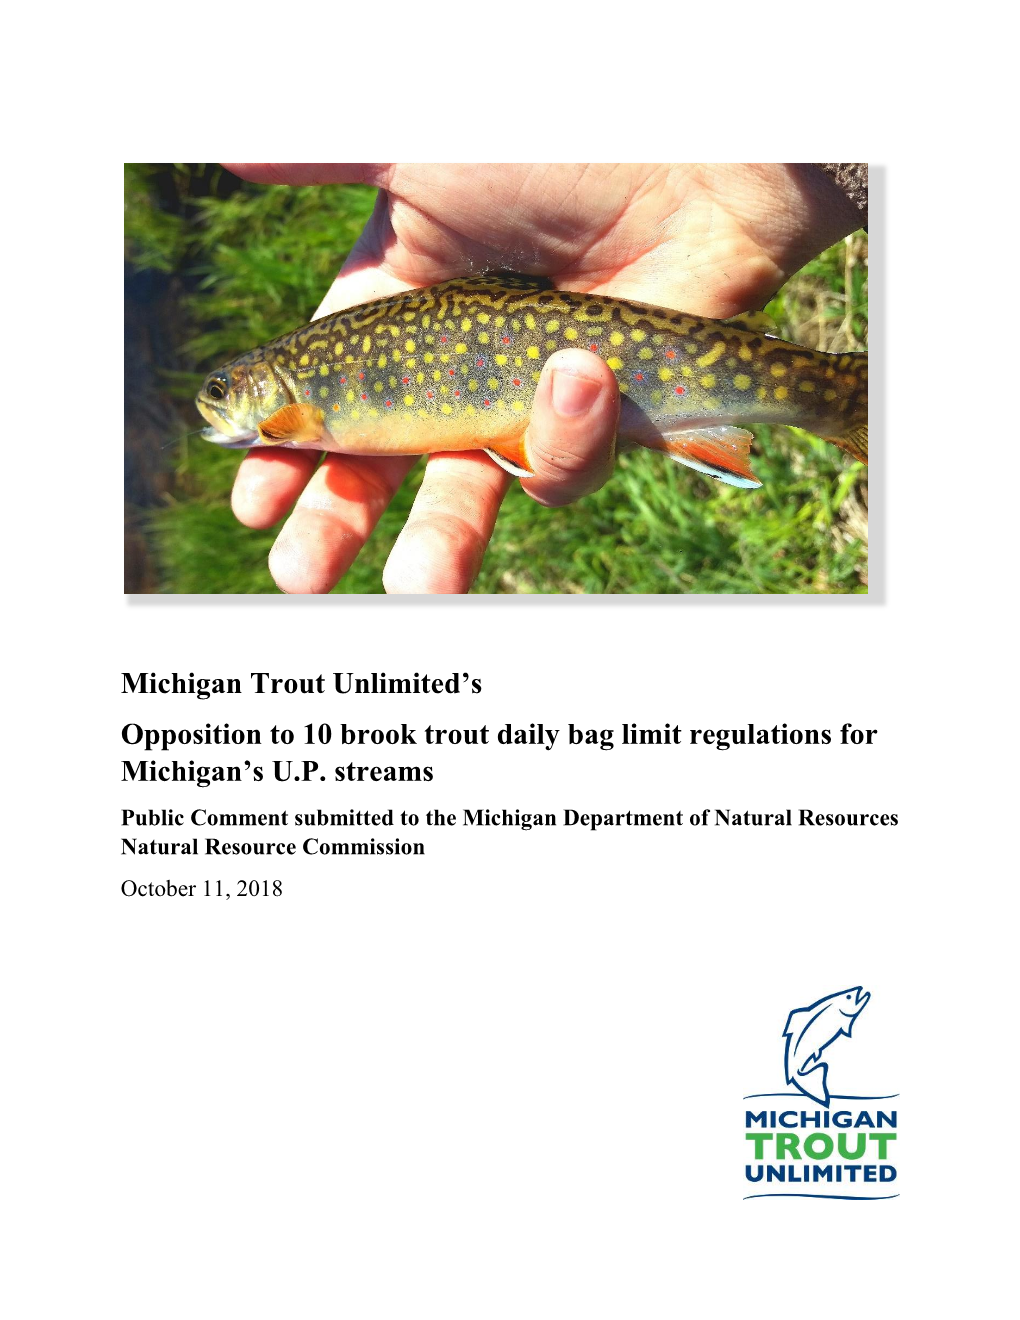 Michigan Trout Unlimited Opposition to Ten Brook Trout Limit